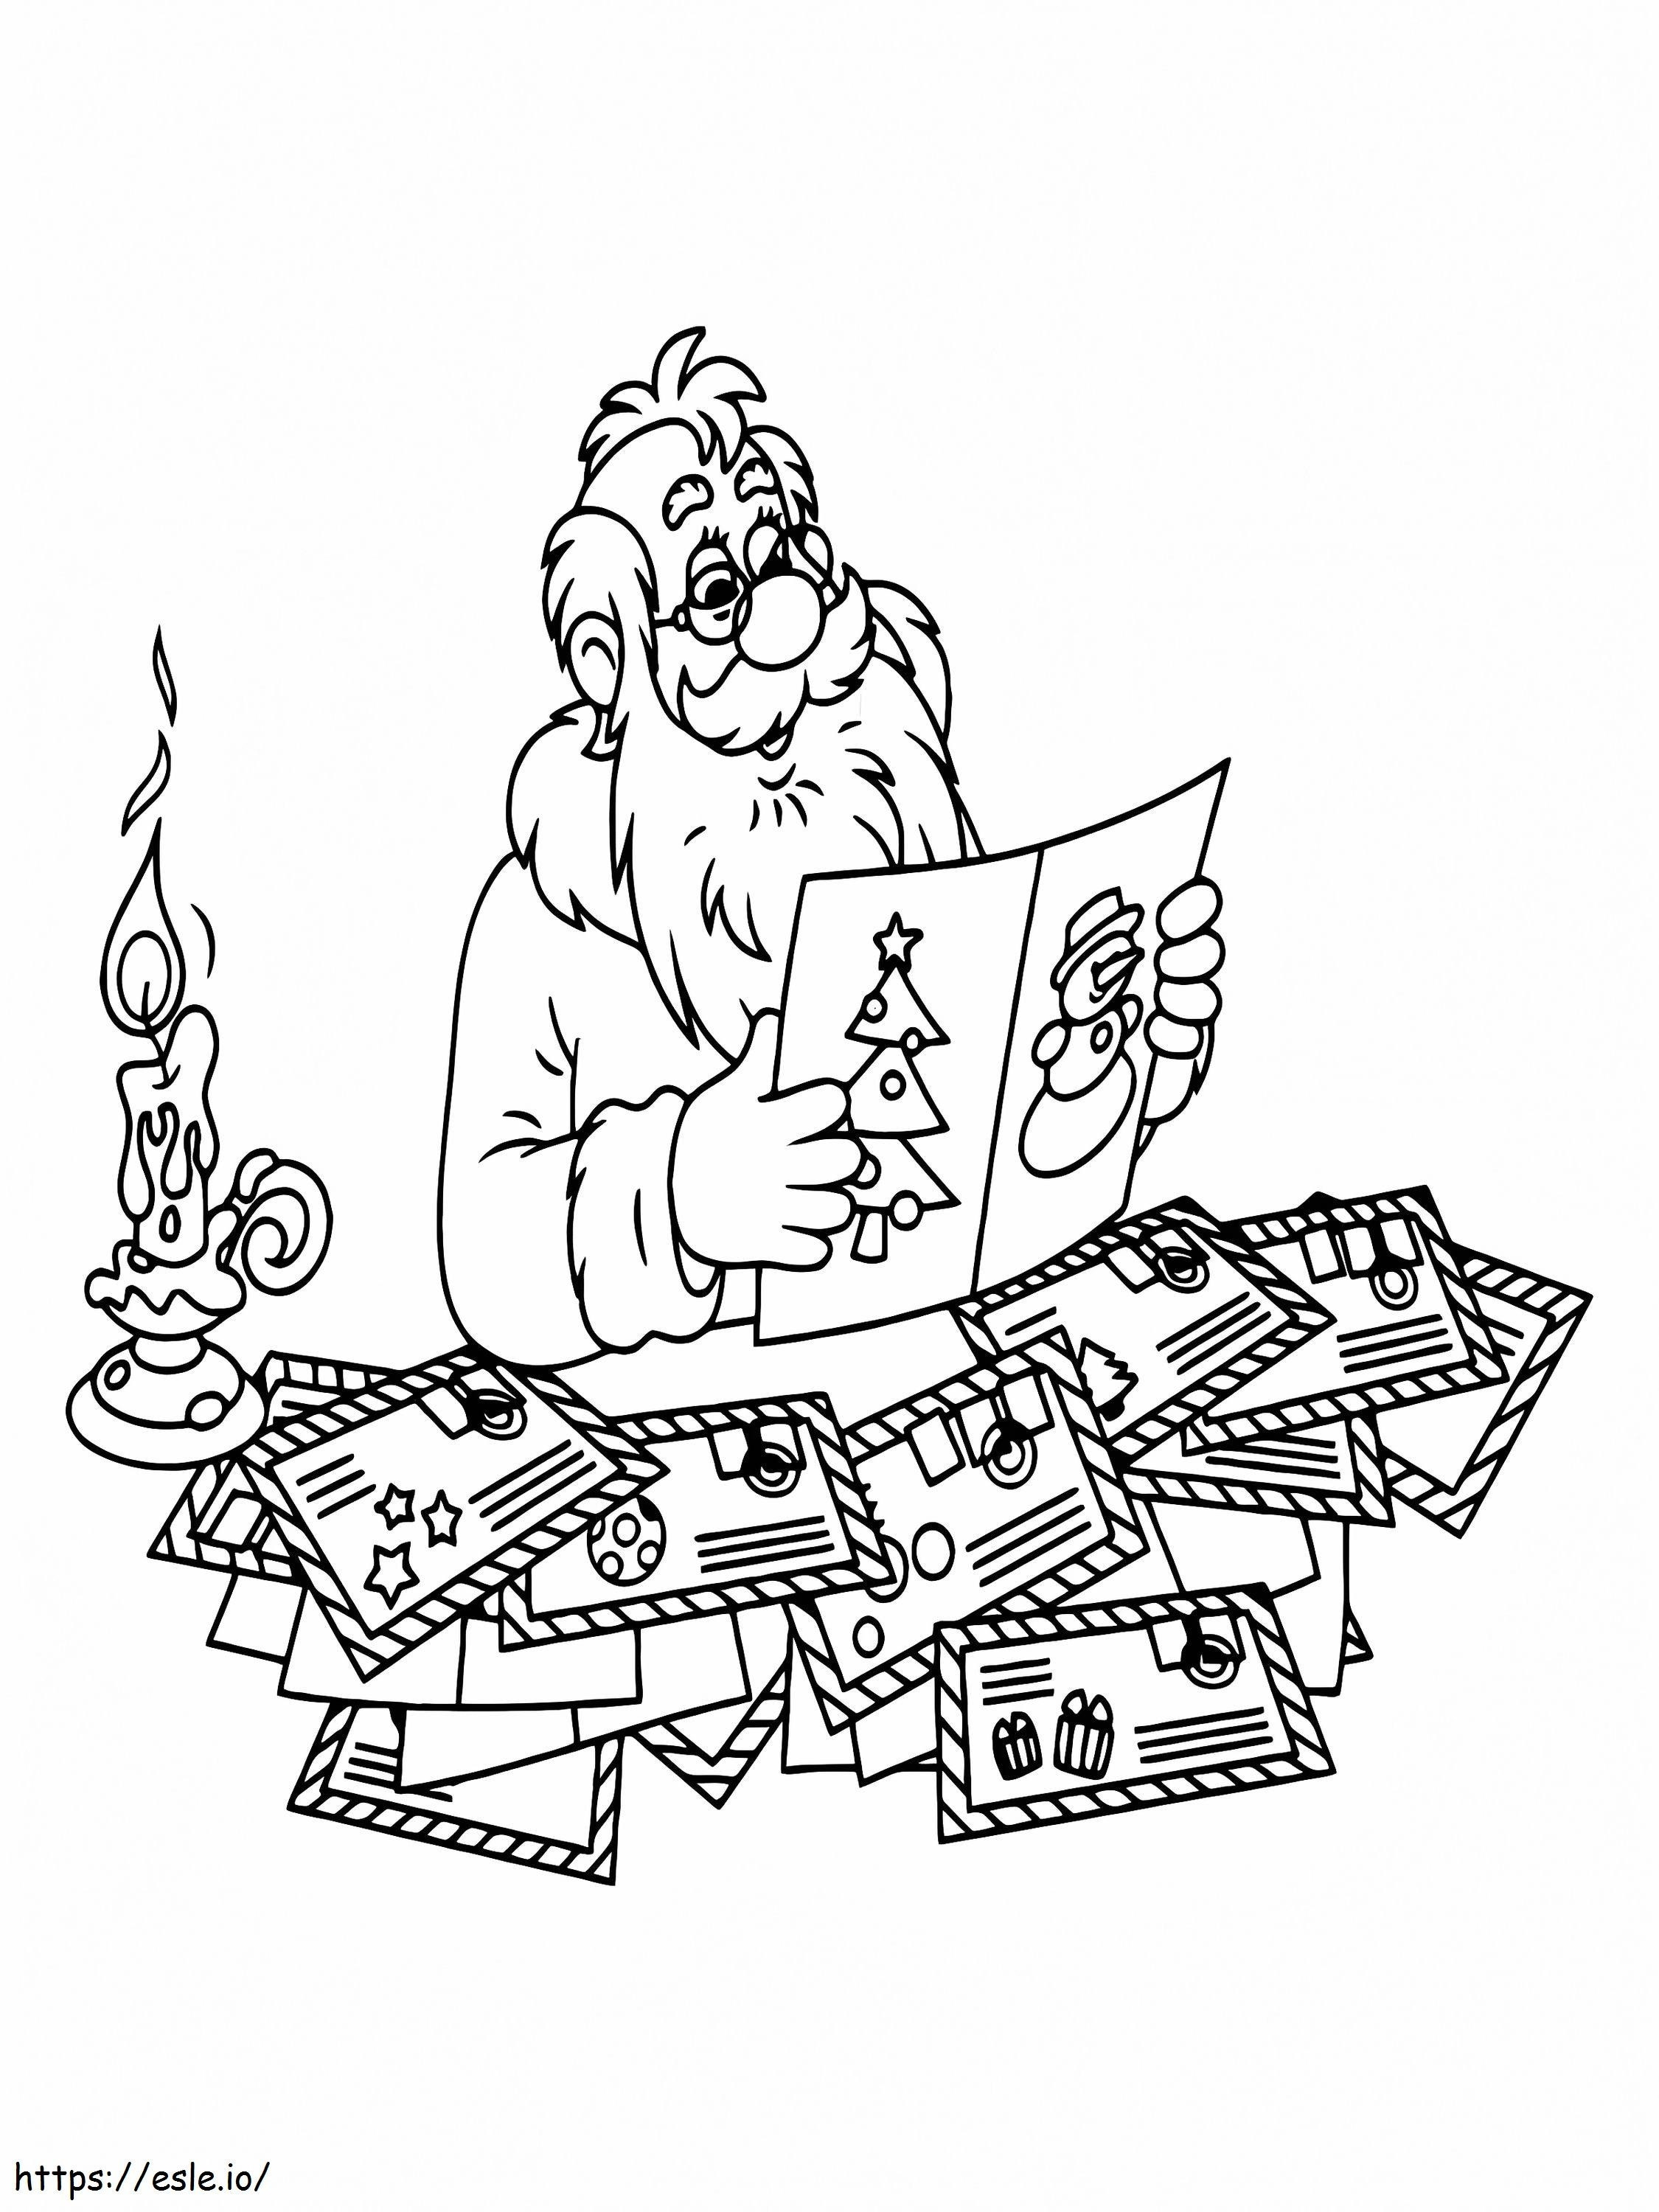 Santa Claus Reading Letters coloring page